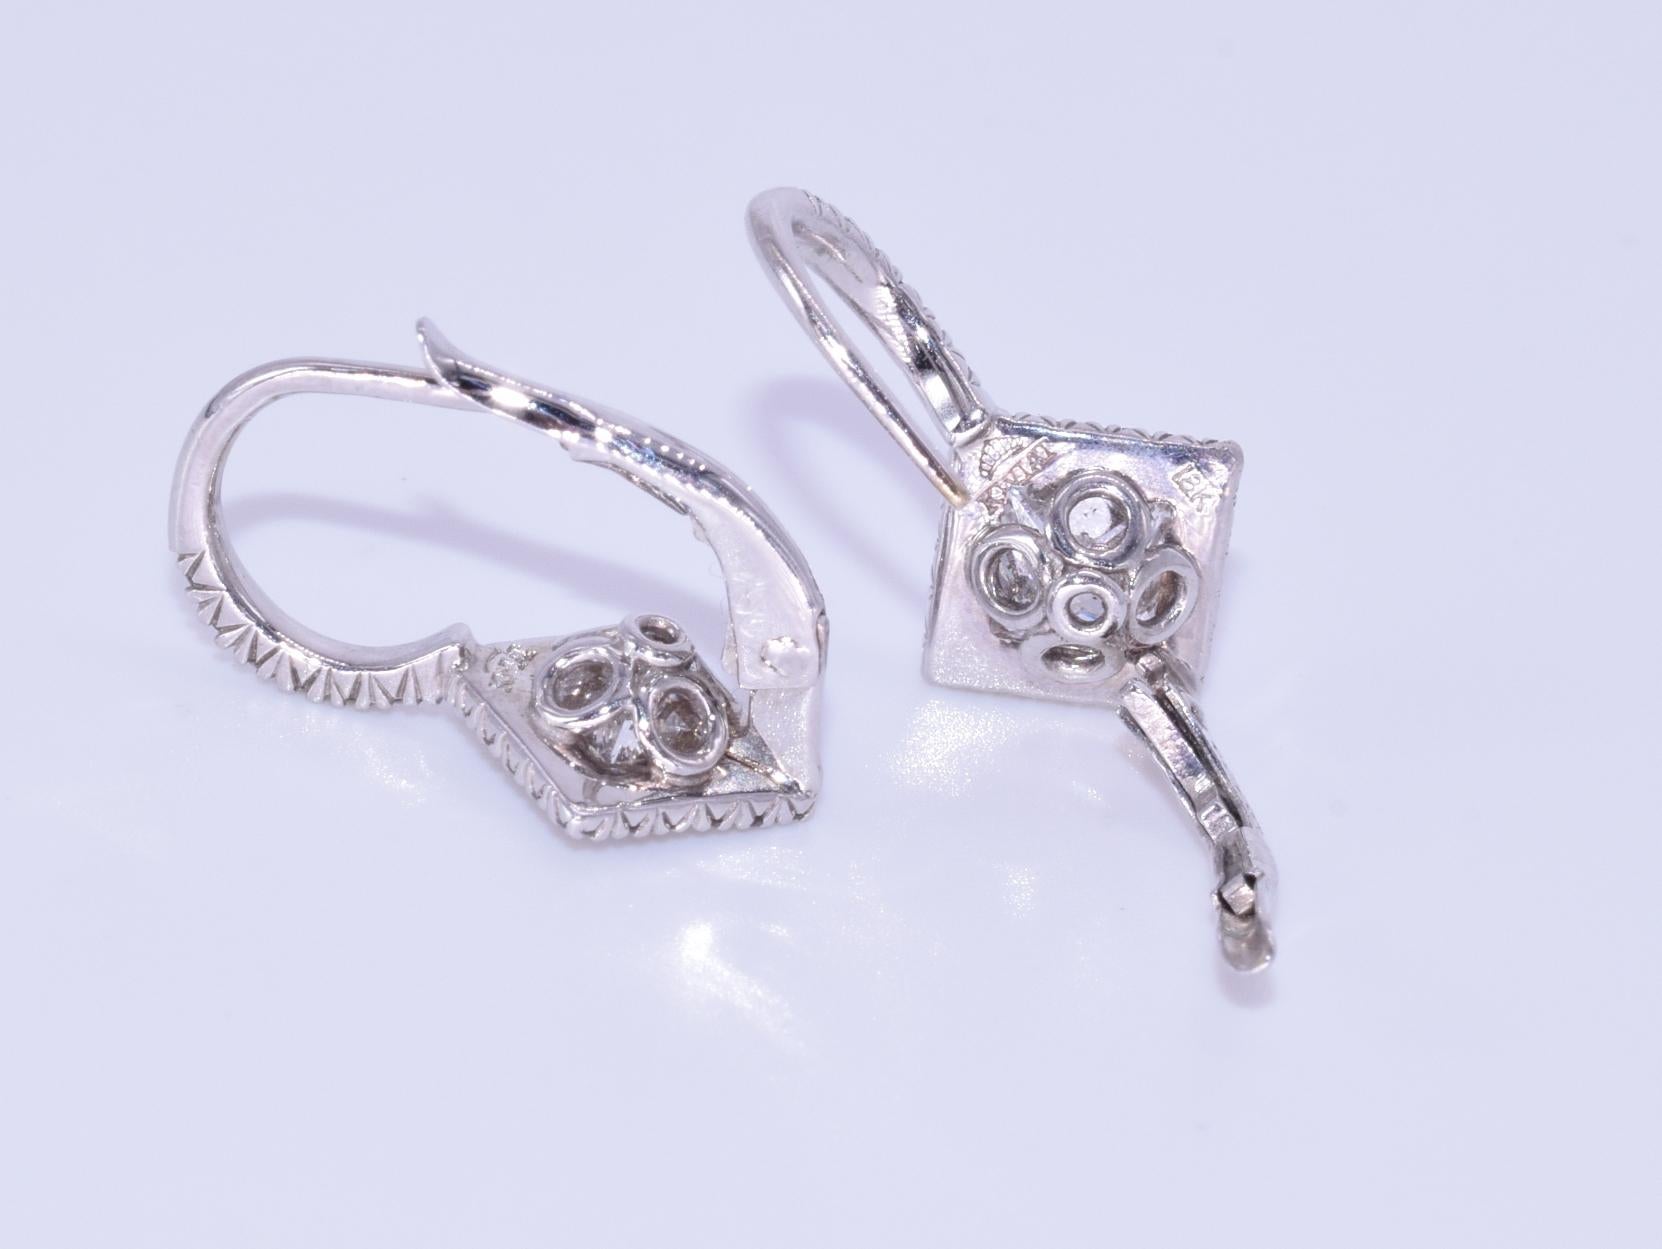 18k White gold Diamond Drop Earrings, Signed Kwiat

These diamond earrings are from the Kwiat Silhouette Collection with two princess cut and 54 round brilliant diamonds totaling 1.69 carats, FG/SI mounted in 18k white gold.  The original retail was